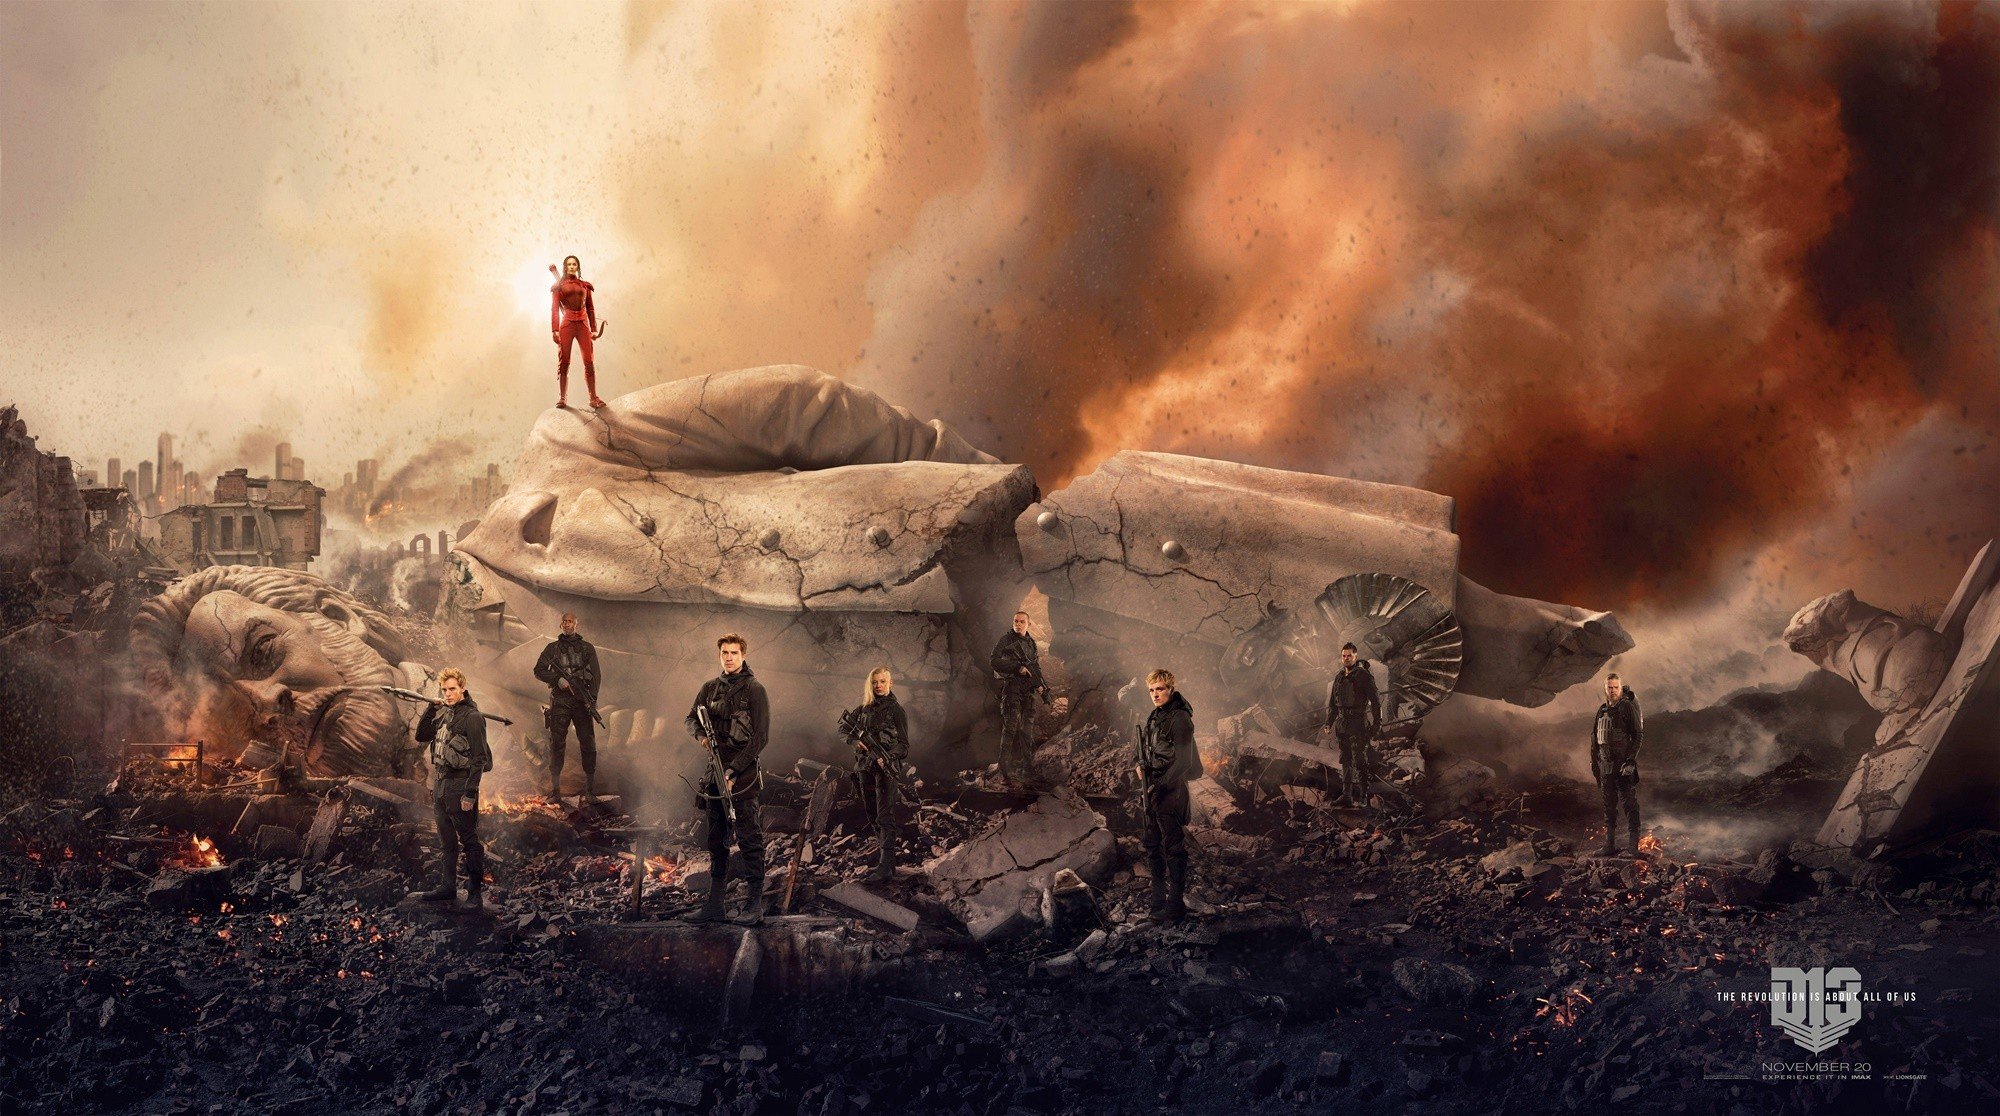 Poster of Lionsgate Films' The Hunger Games: Mockingjay, Part 2 (2015)